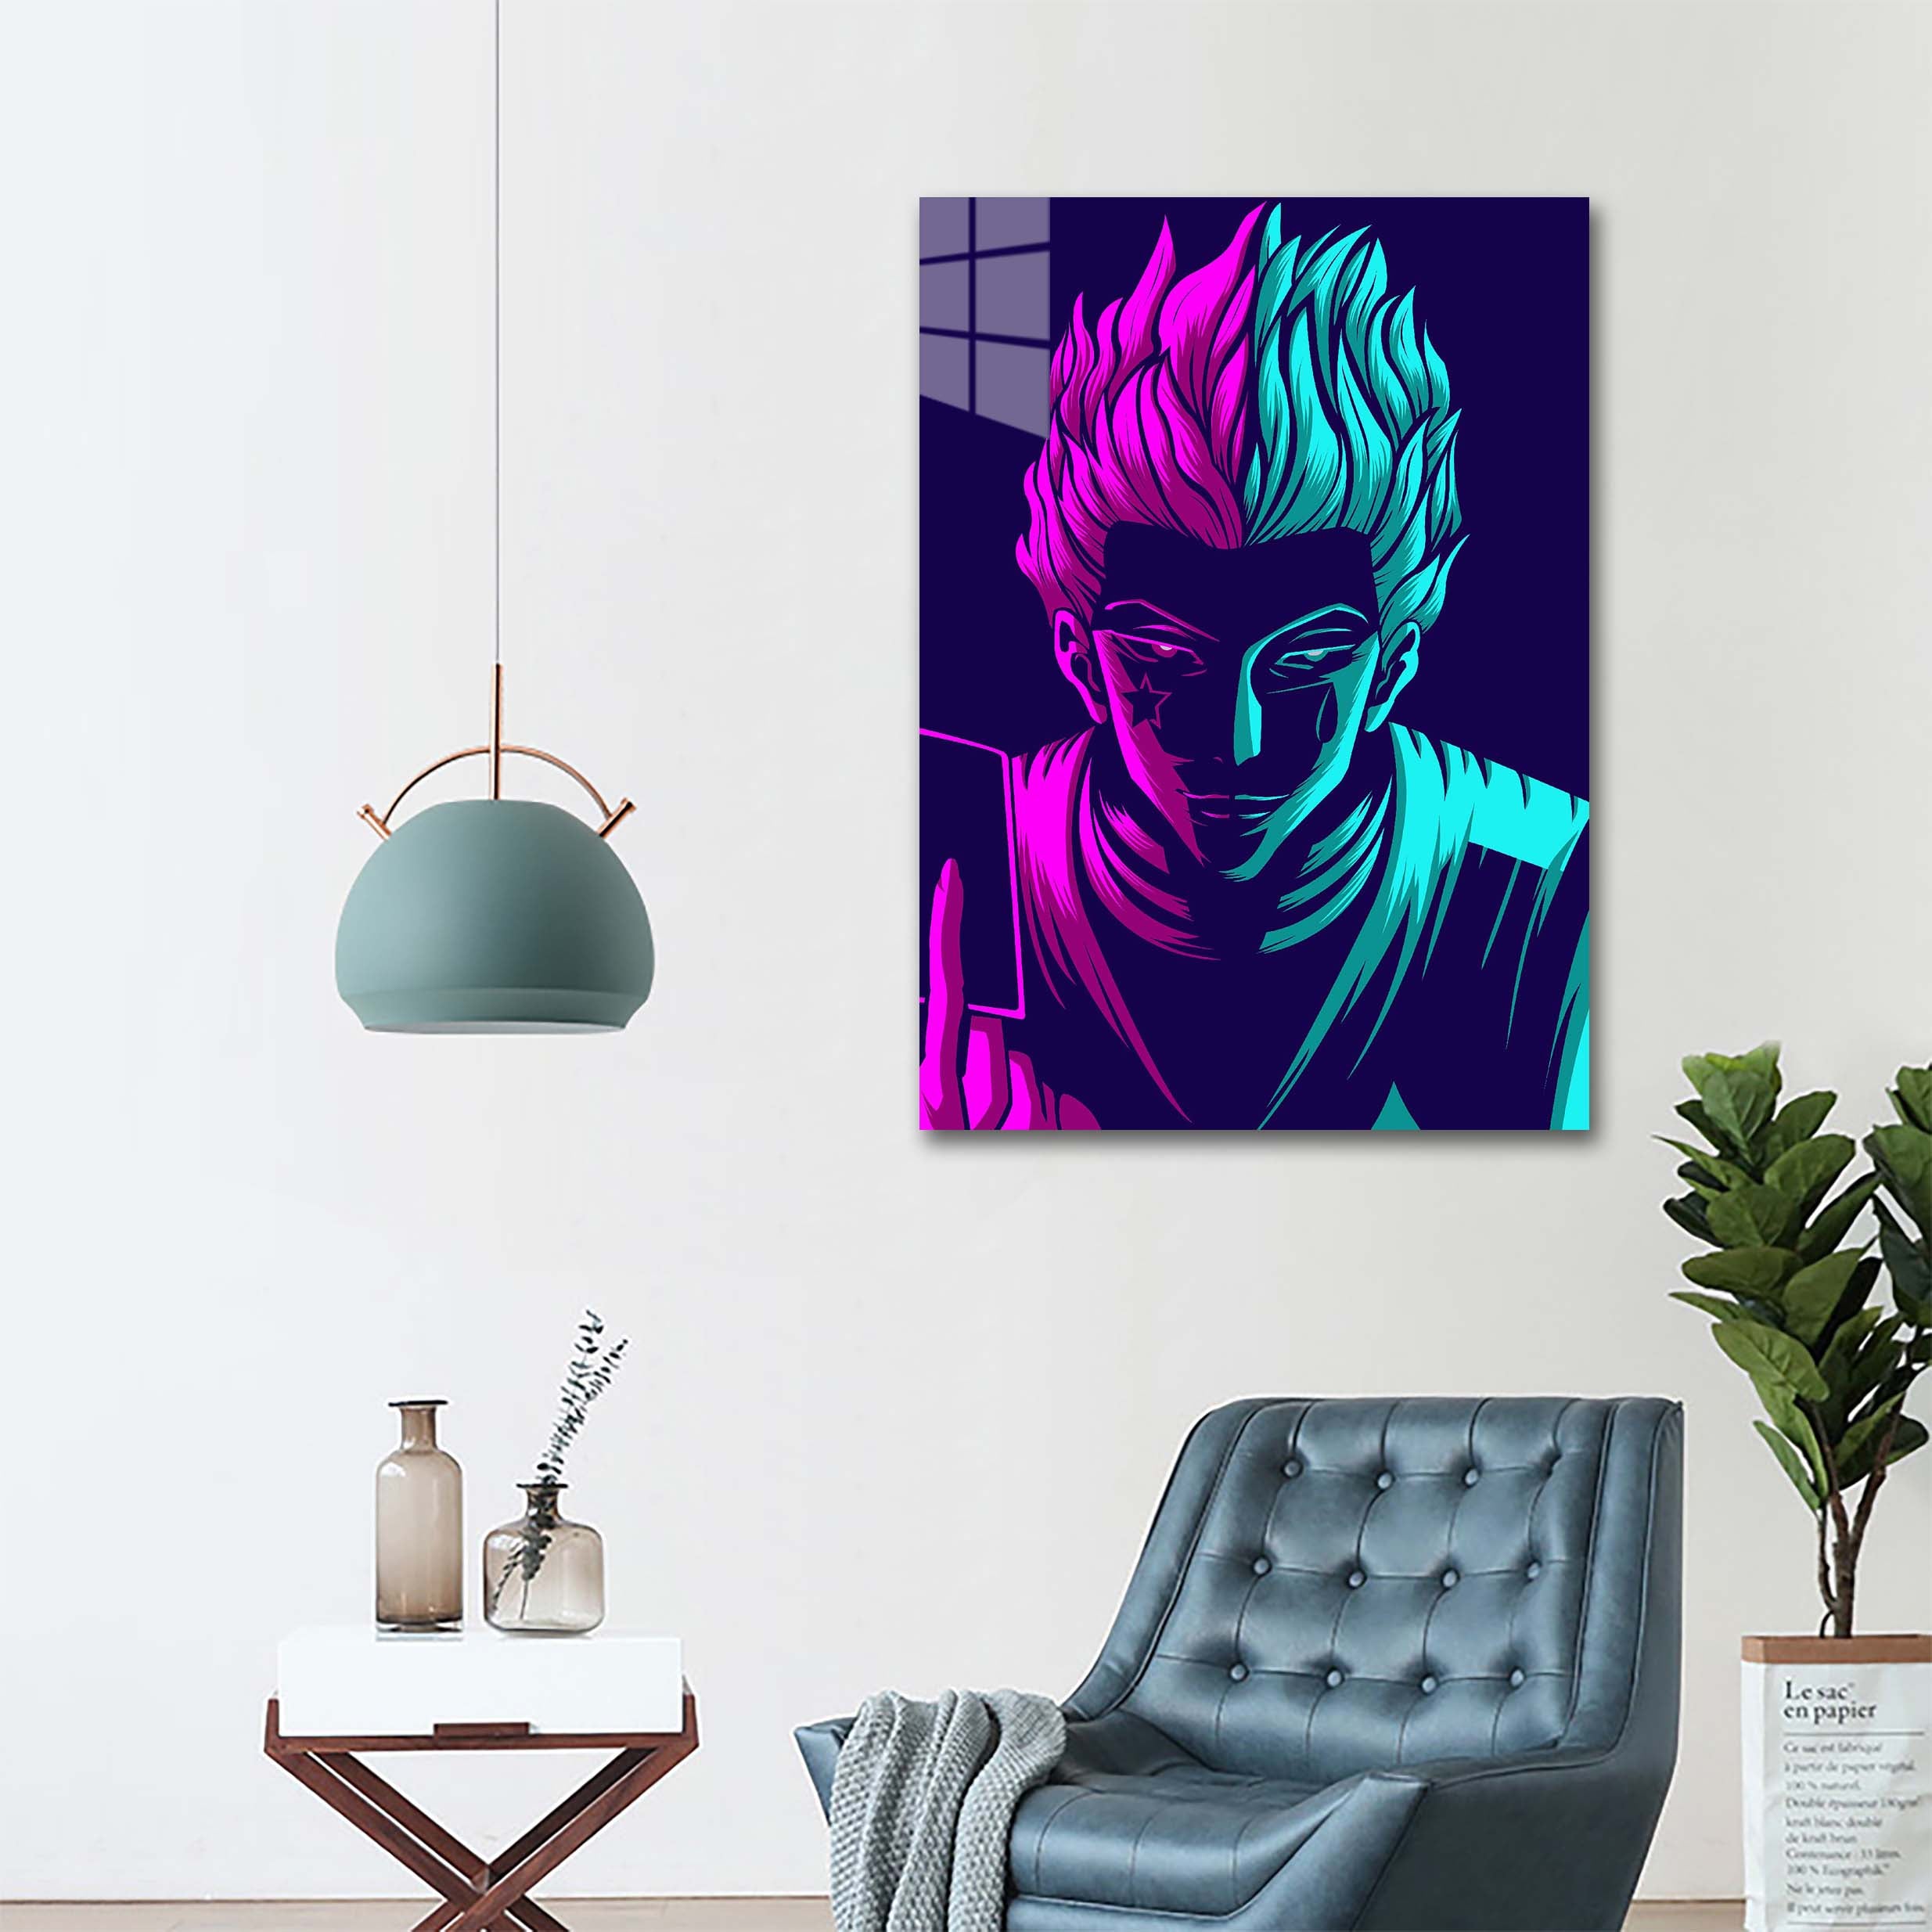 Hisoka neon style-designed by @Billy